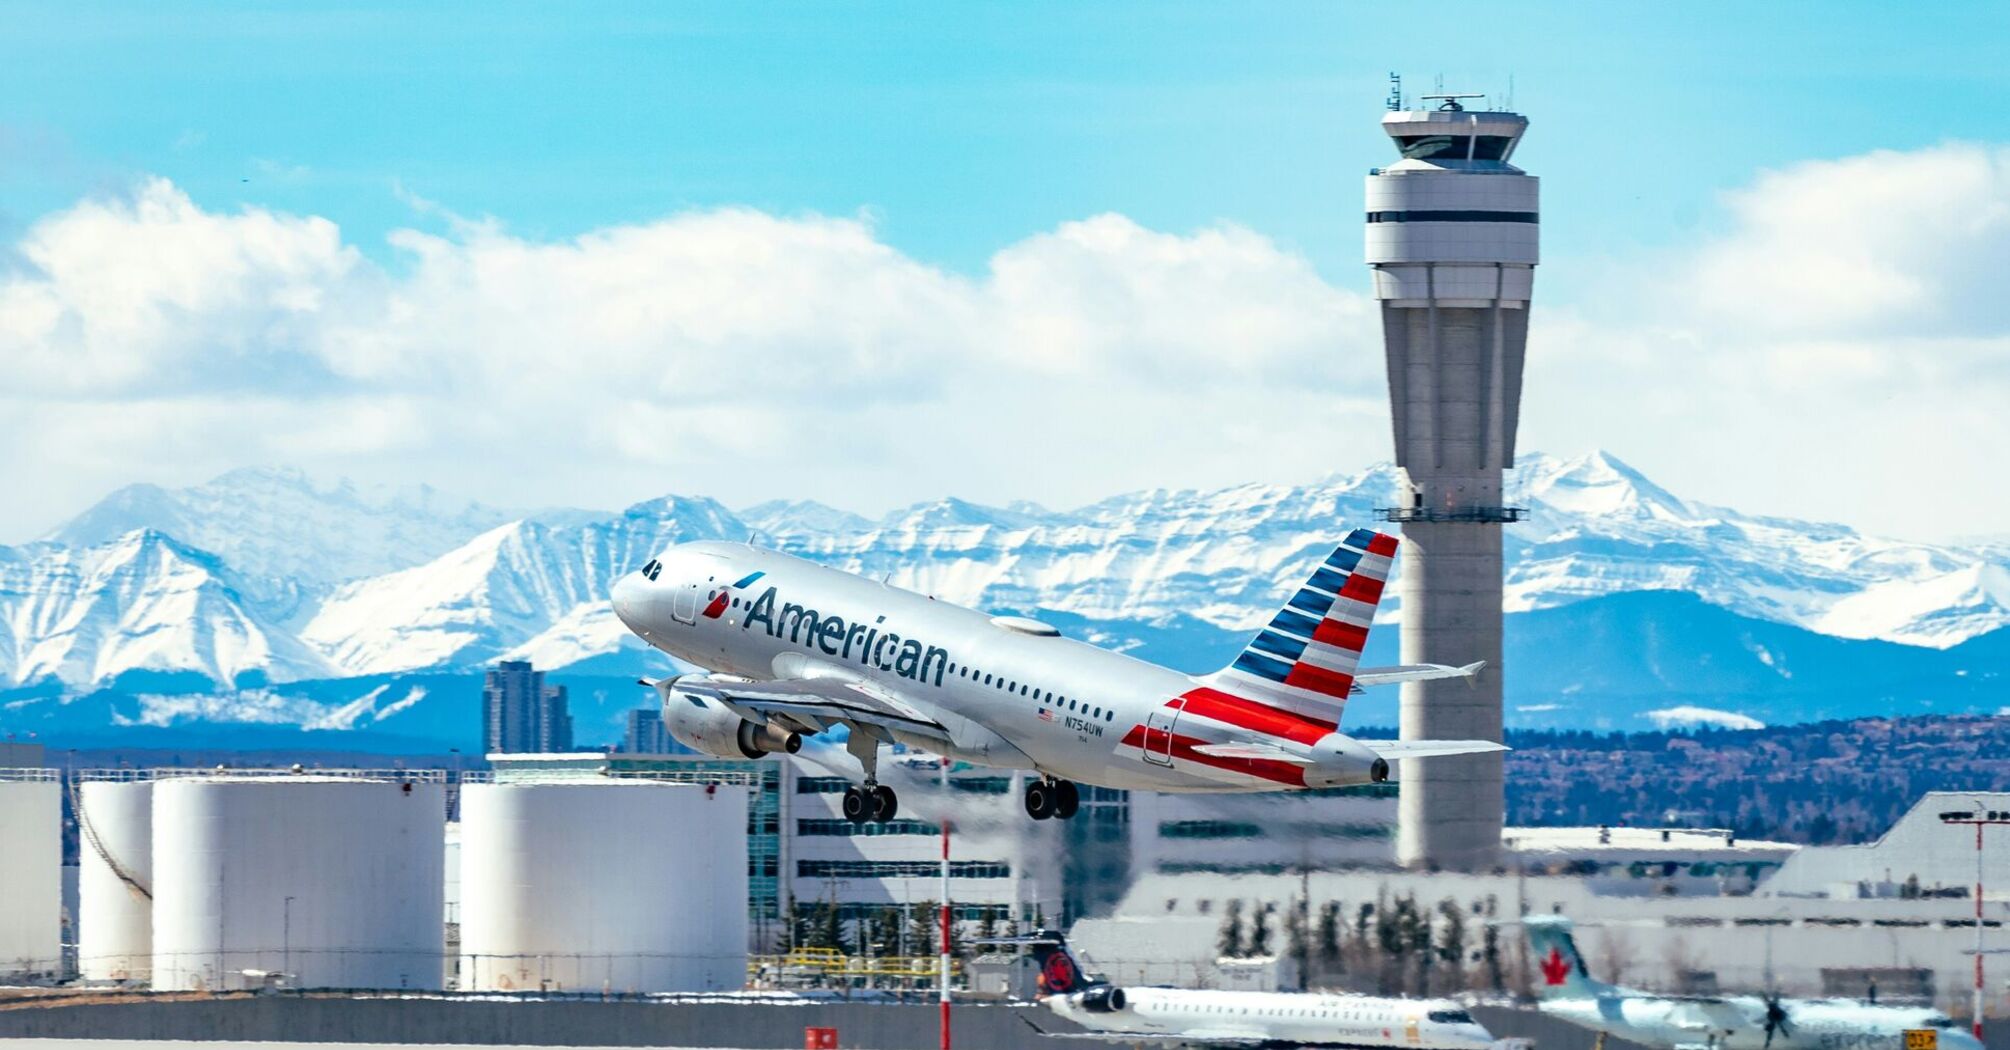 American Airlines aircraft taking off from an airport with a control tower in the foreground and snow-capped mountains in the background